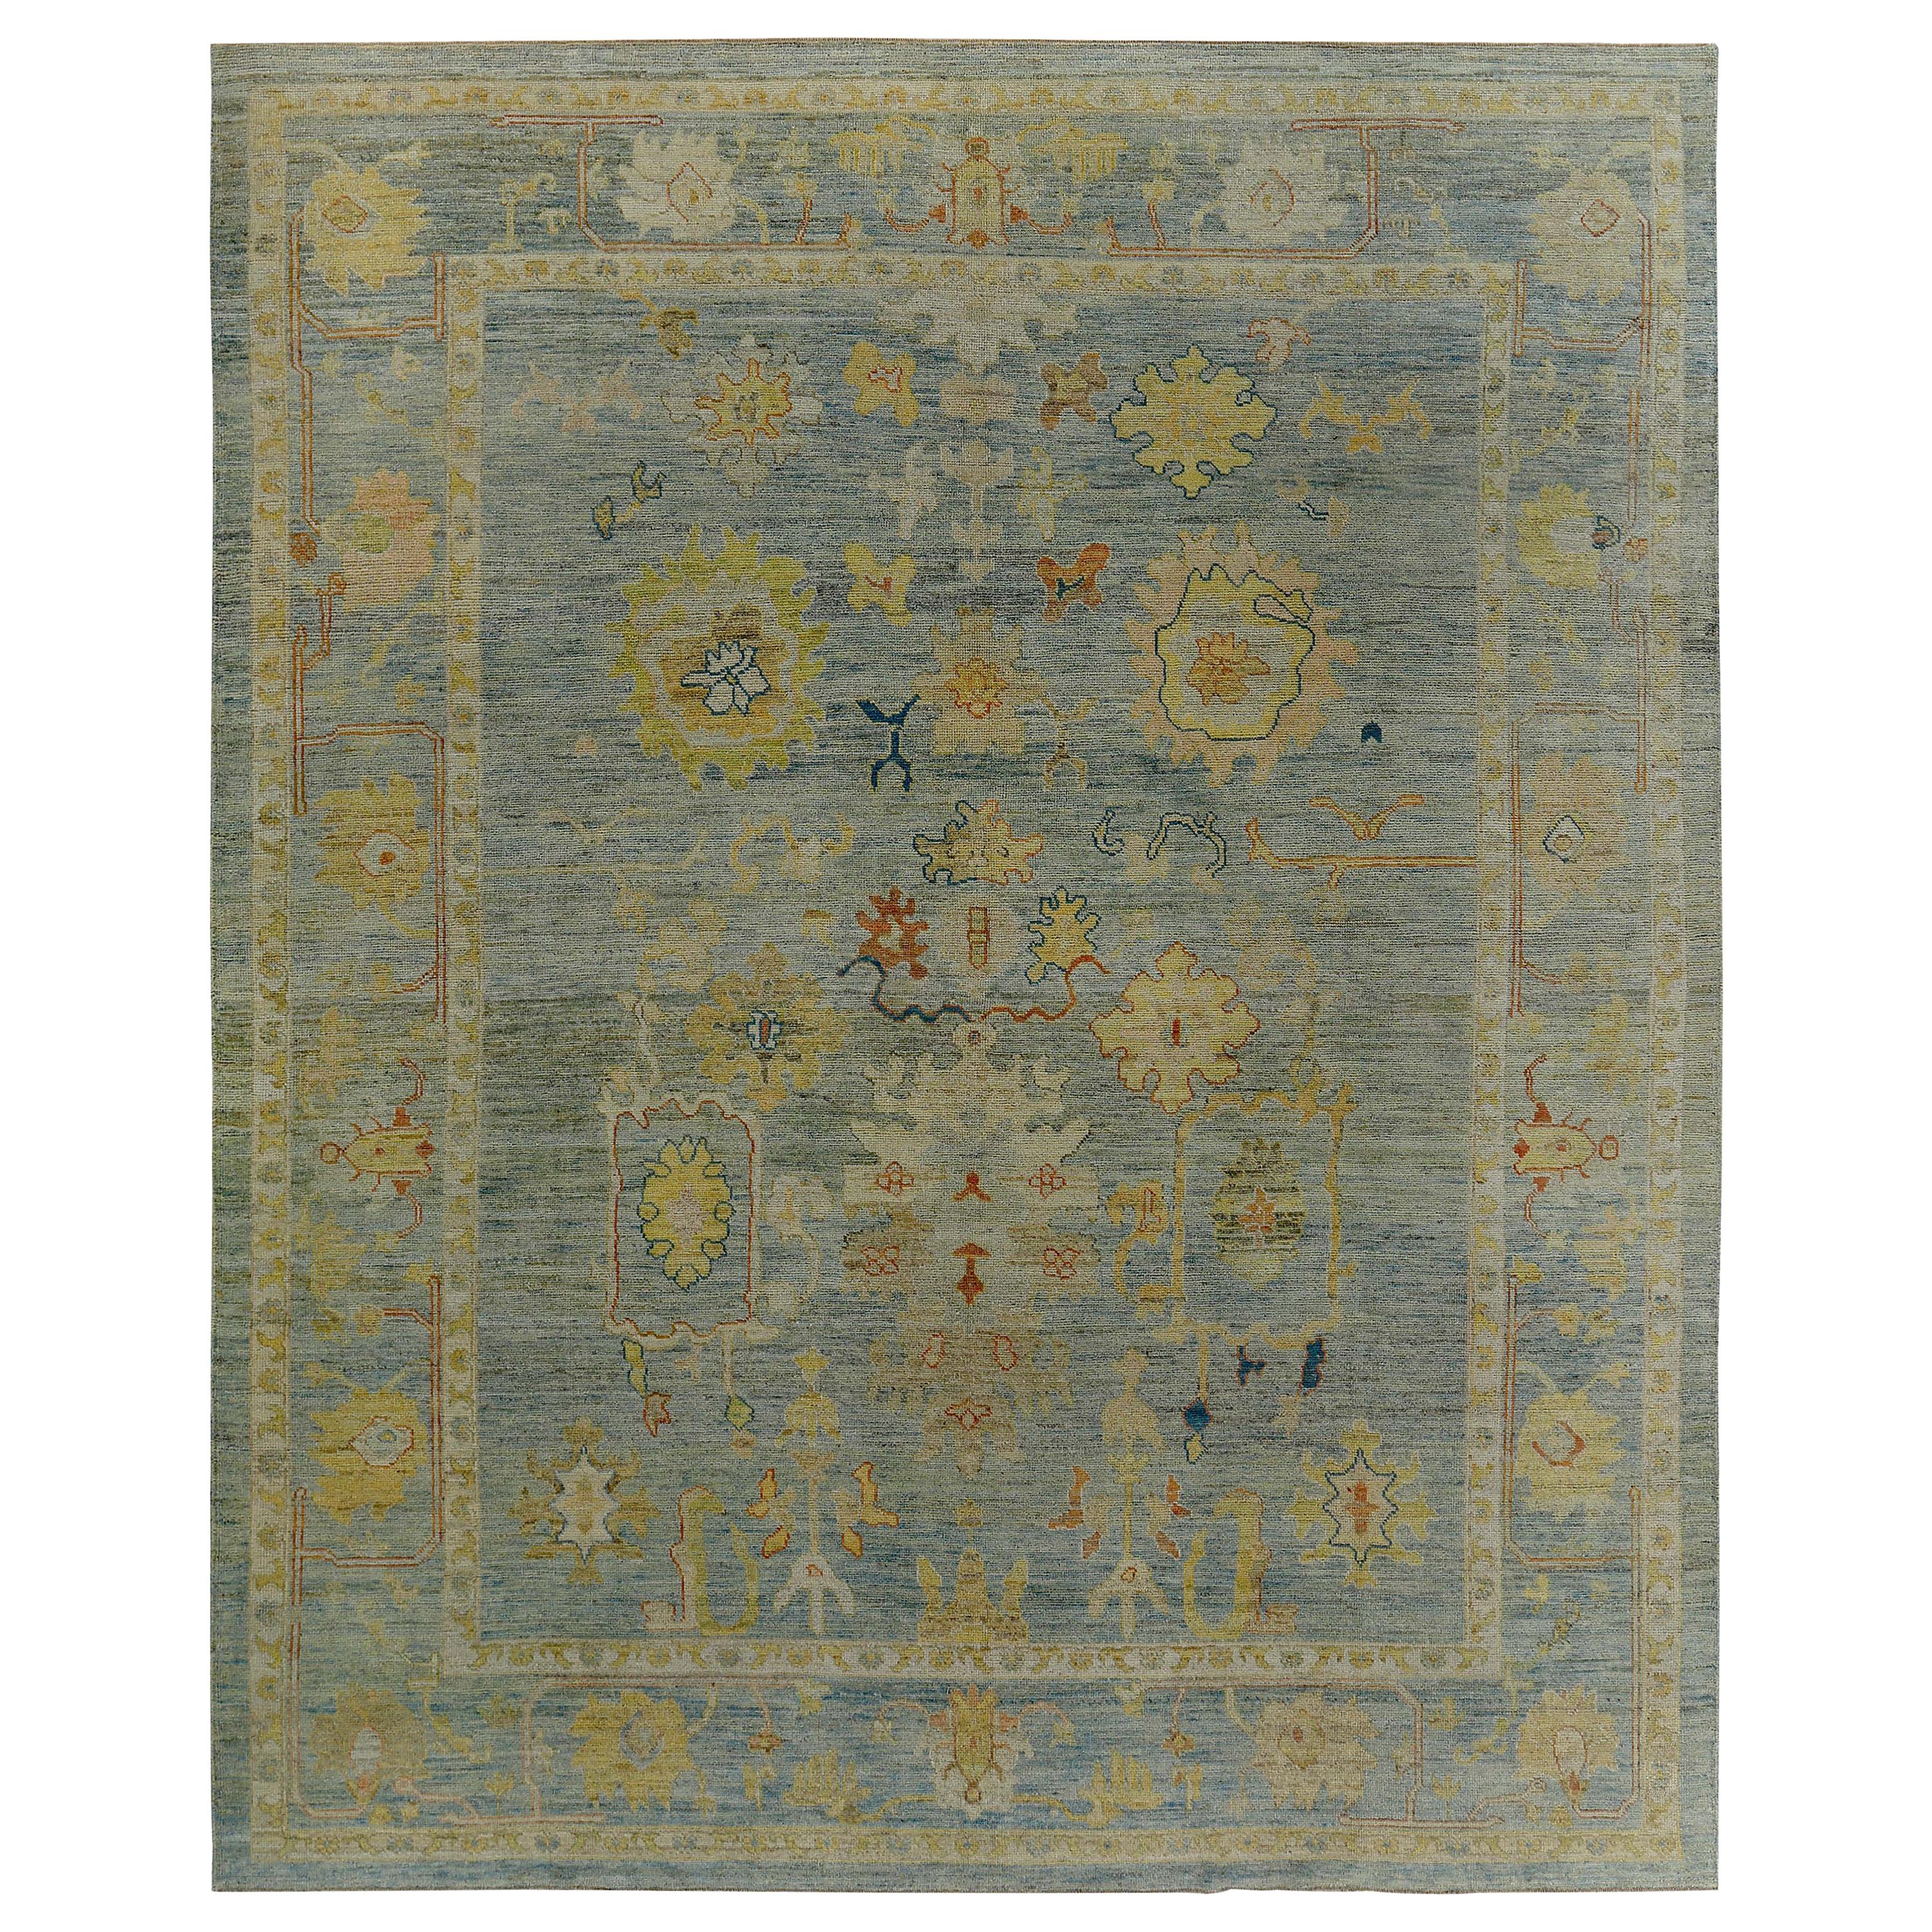 Turkish Oushak Rug with Ivory & Gold Floral Details on Blue Field